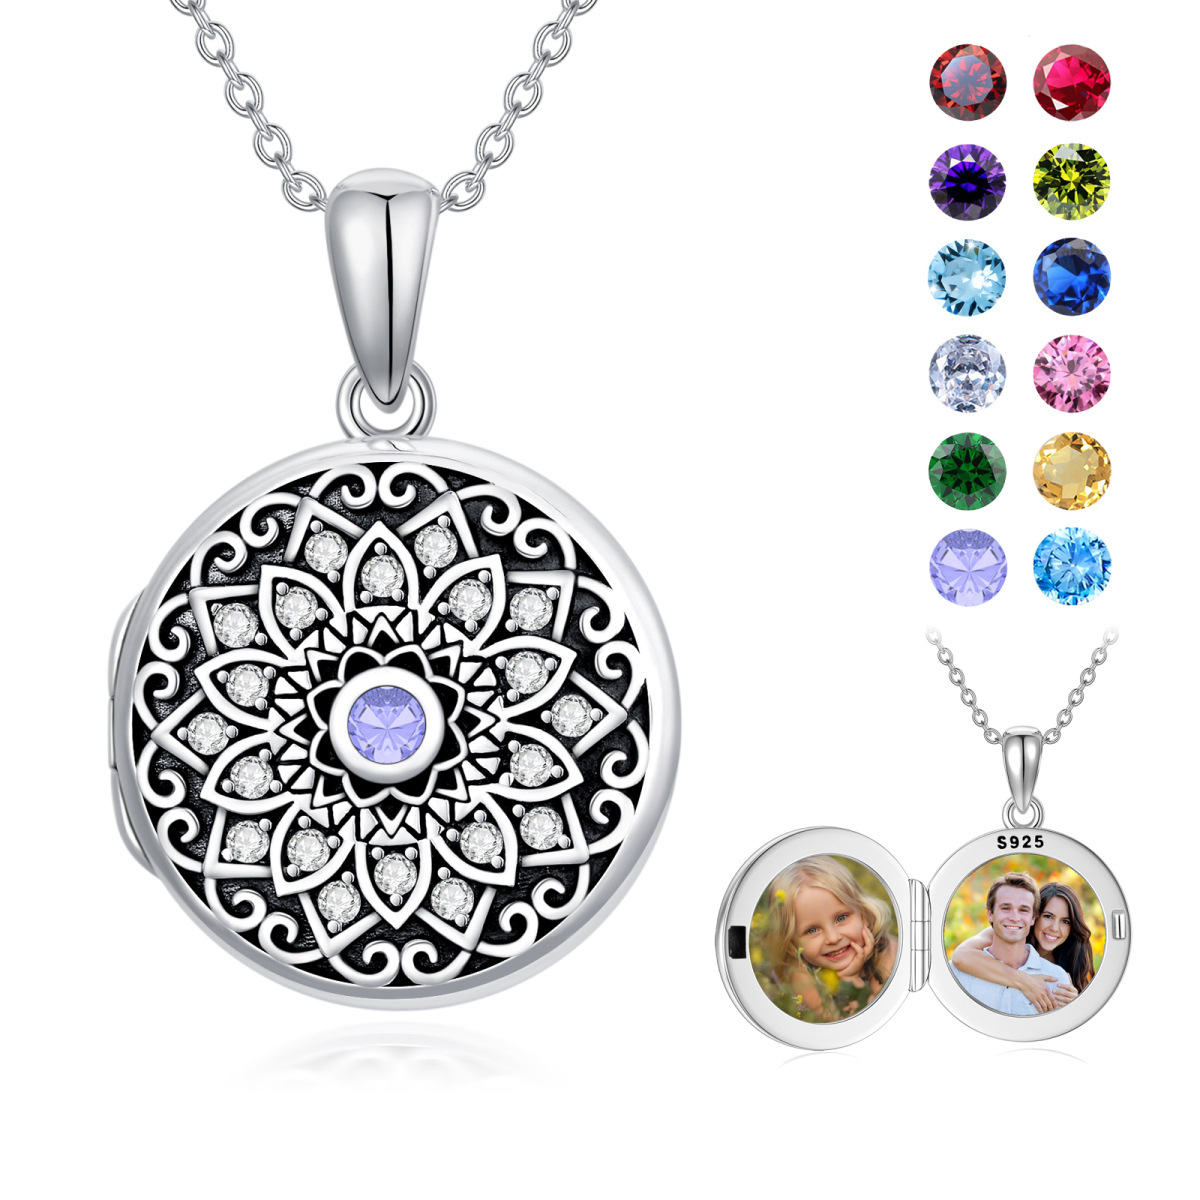 Collier en argent sterling avec mot gravé Lotus Round Zircon Personalized Birthstone Custom Photo Locket Necklace with Engraved Word-1